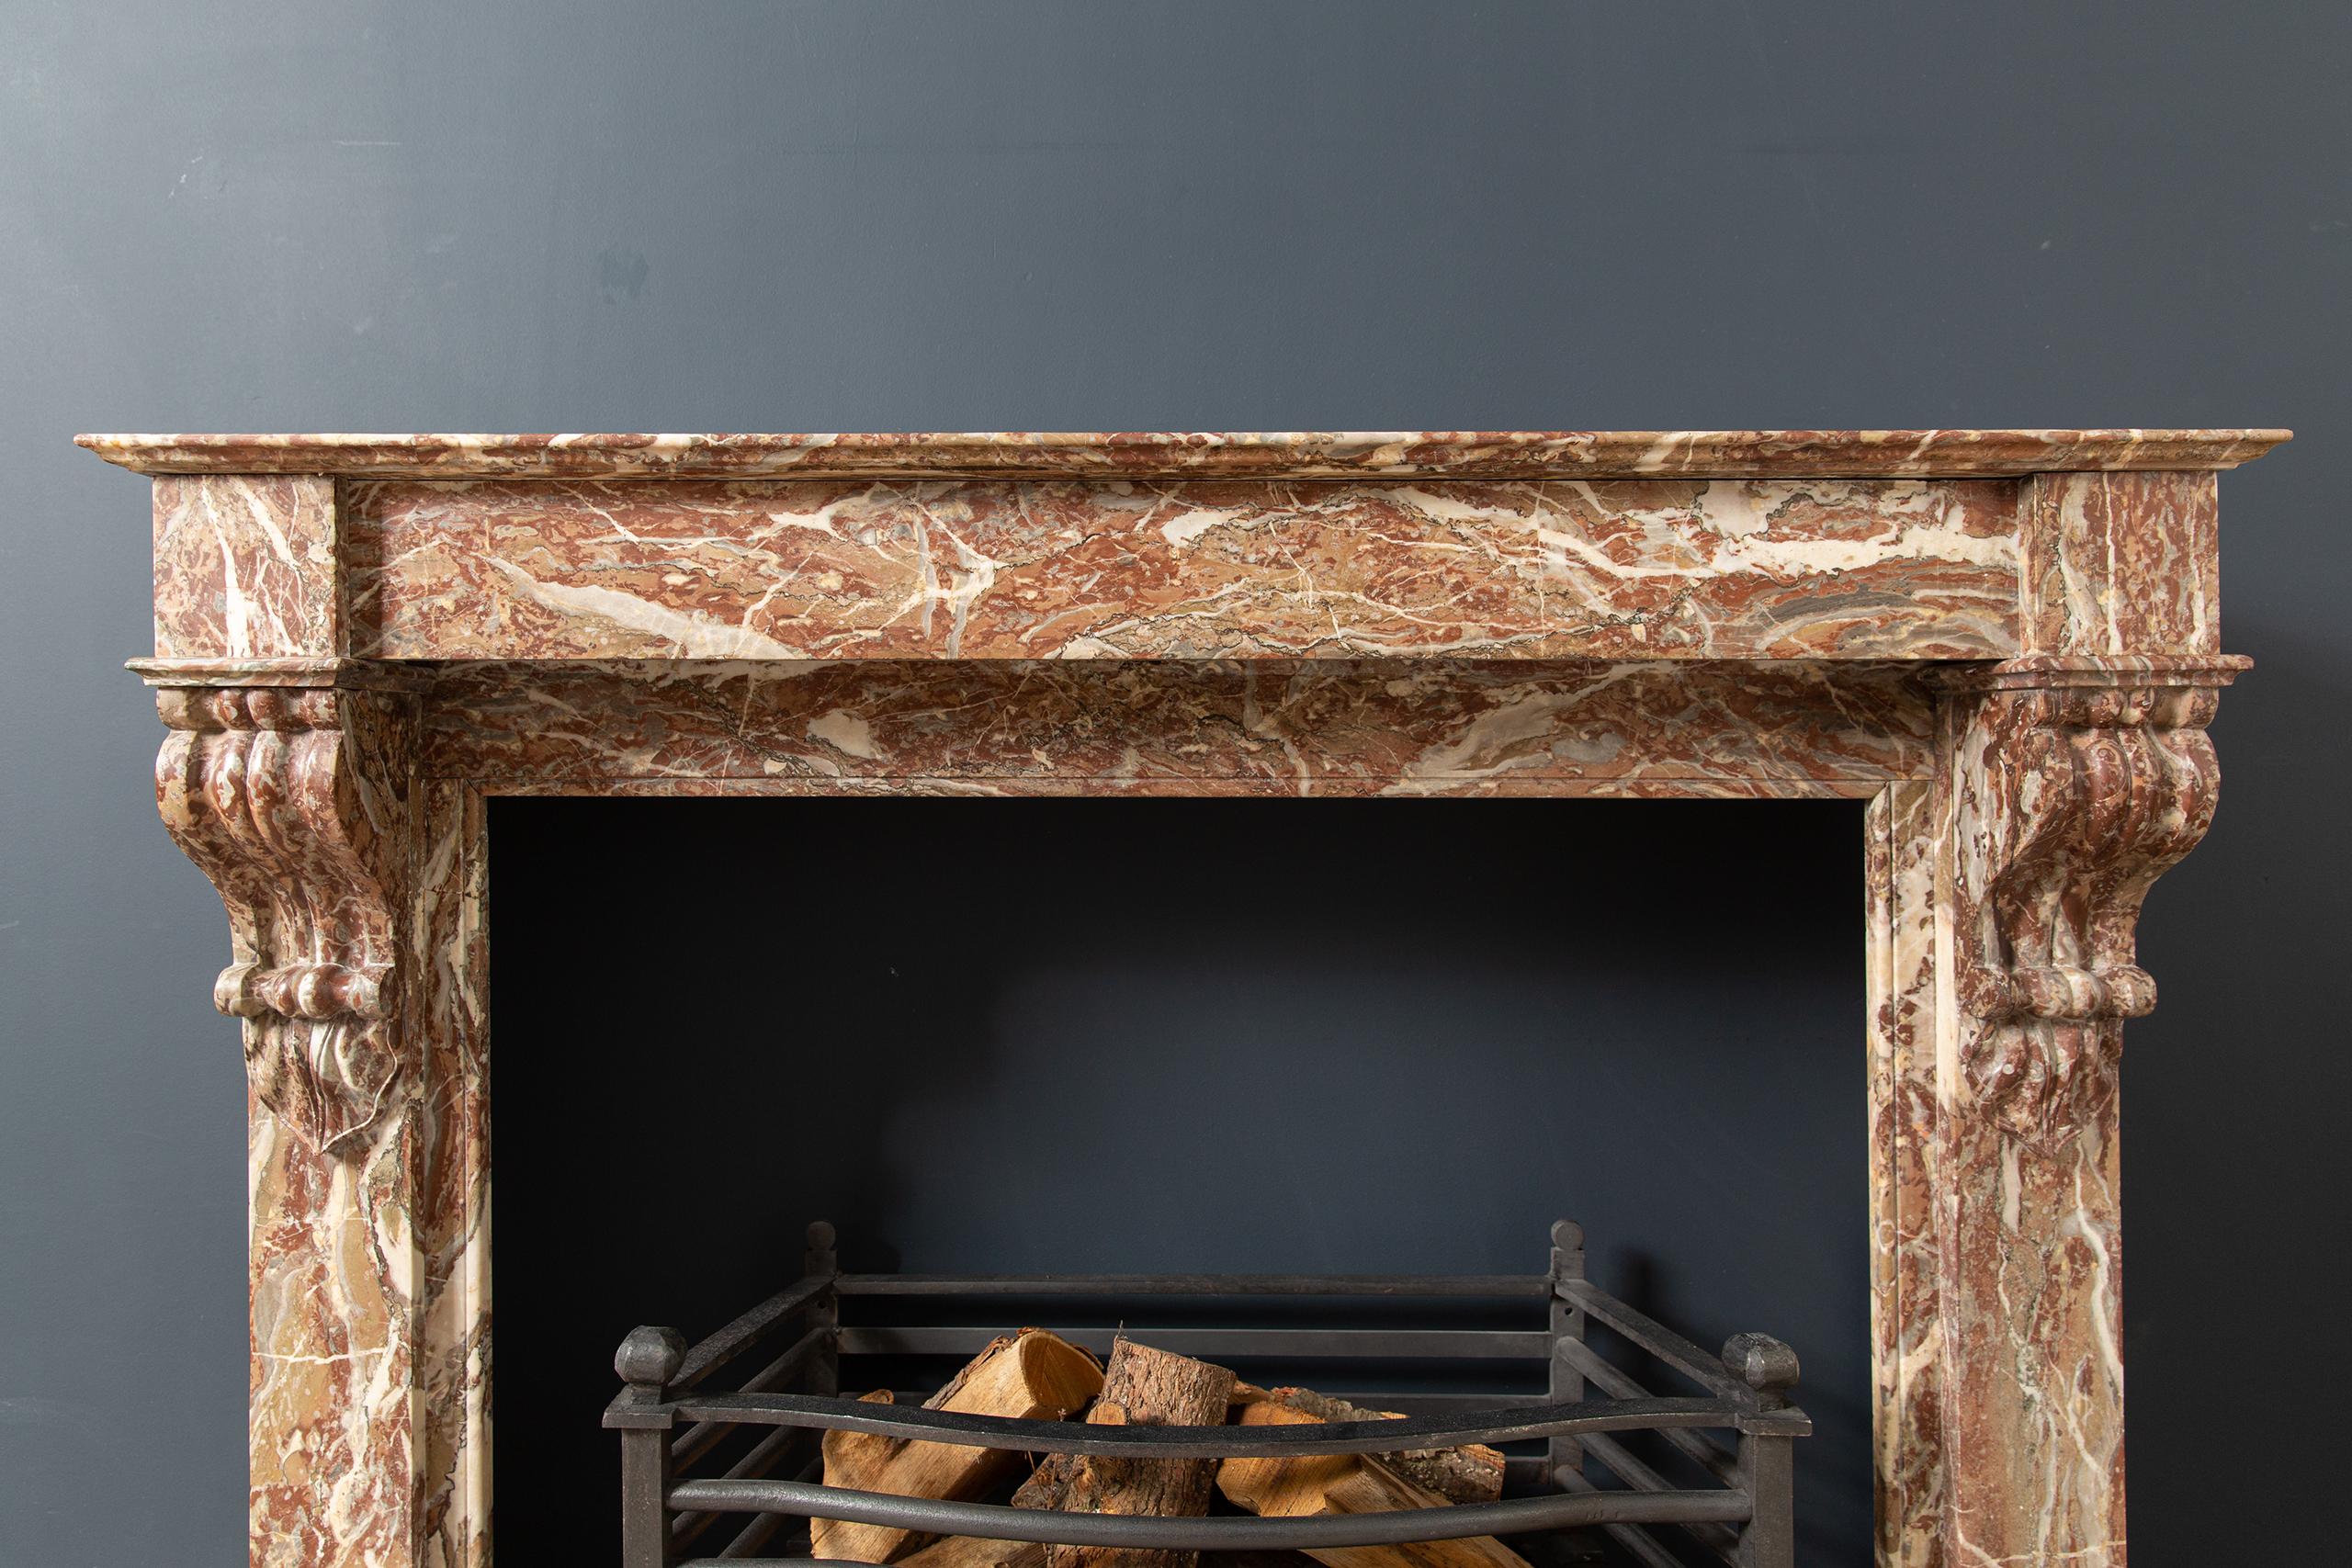 Stately red marble antique fireplace. This front model has a beautiful expressive appearance. The marble contains different colored veins, which gives this fireplace its unique appearance. The difference in depth in the front gives this antique